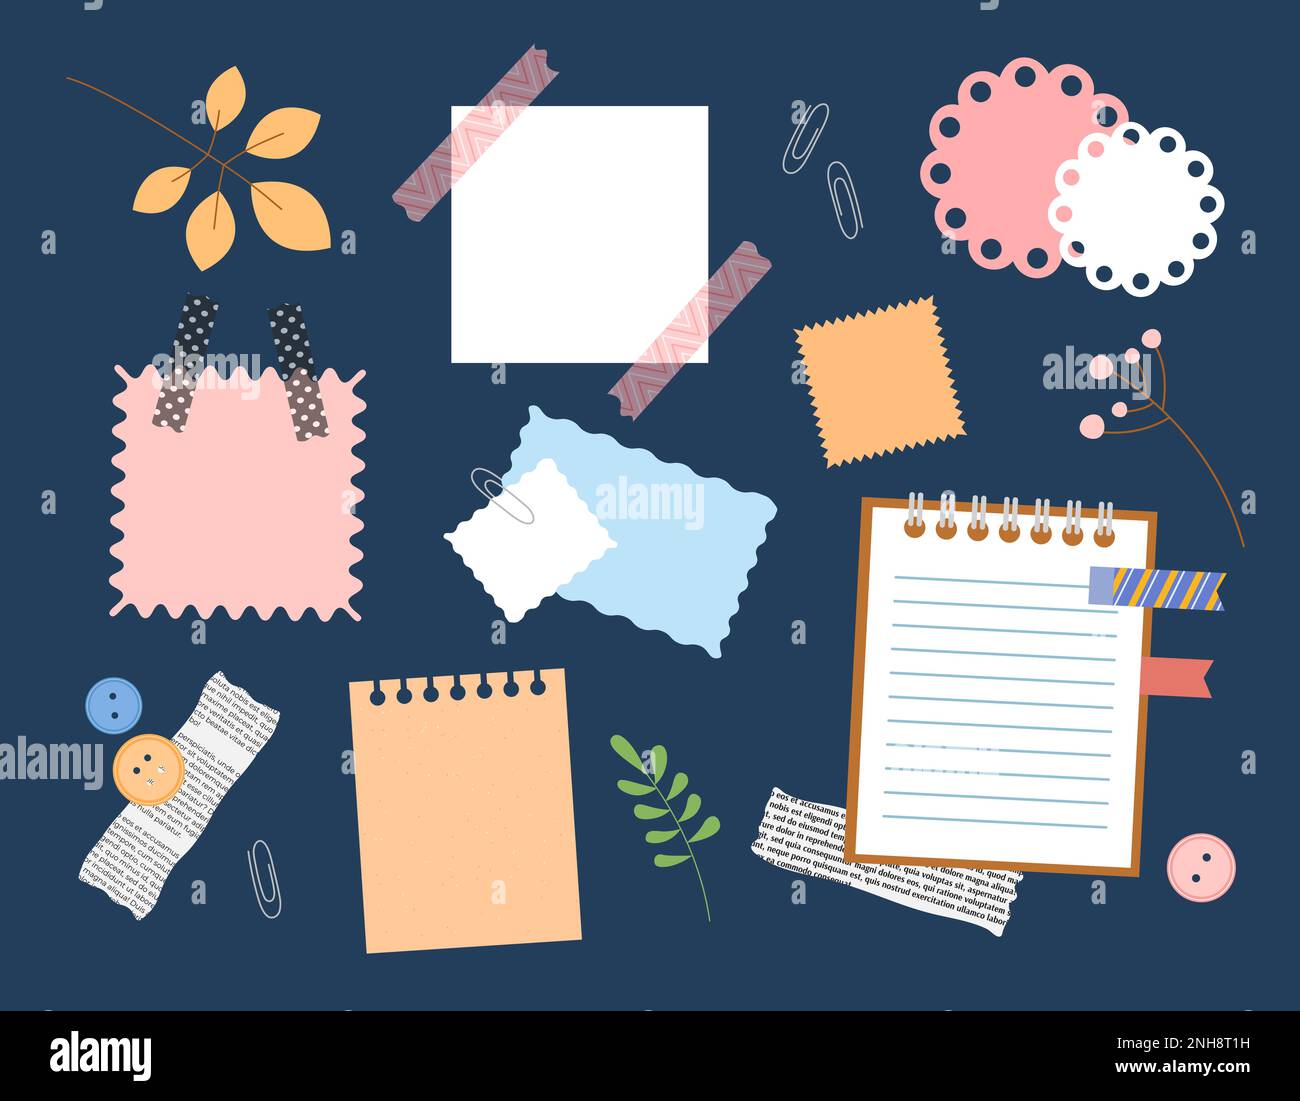 Scrapbooking tools all best world brands Stock Photo - Alamy